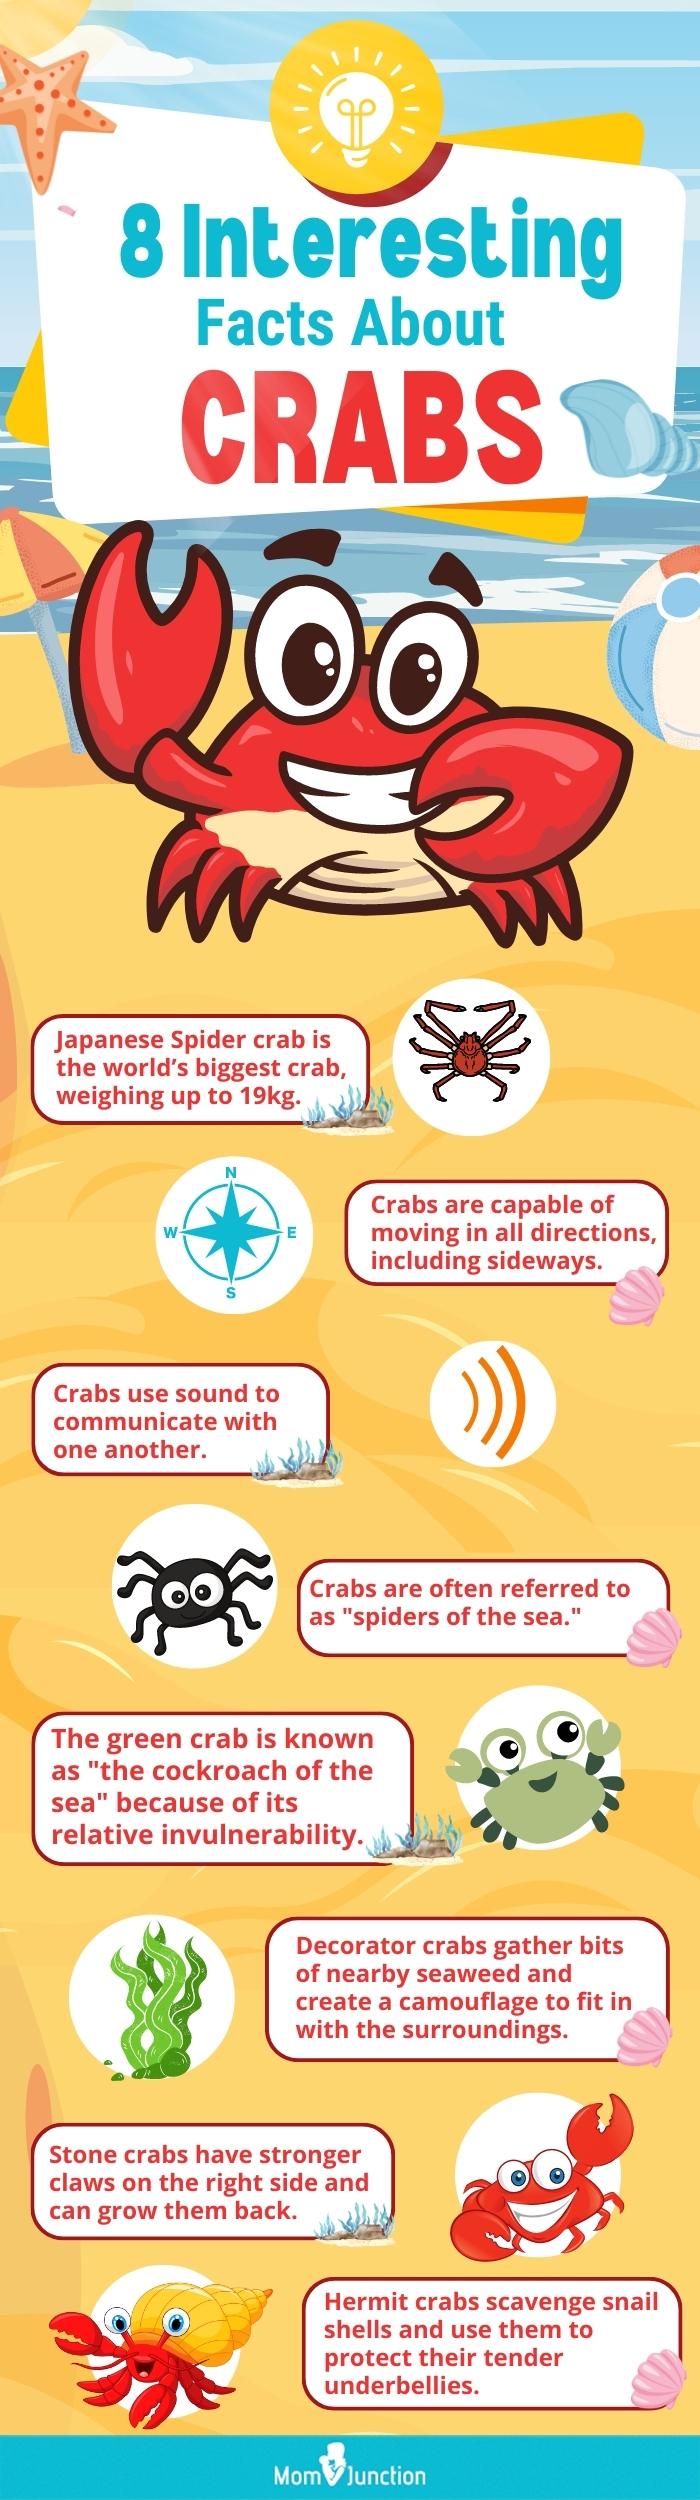 8 interesting facts about crabs (infographic)